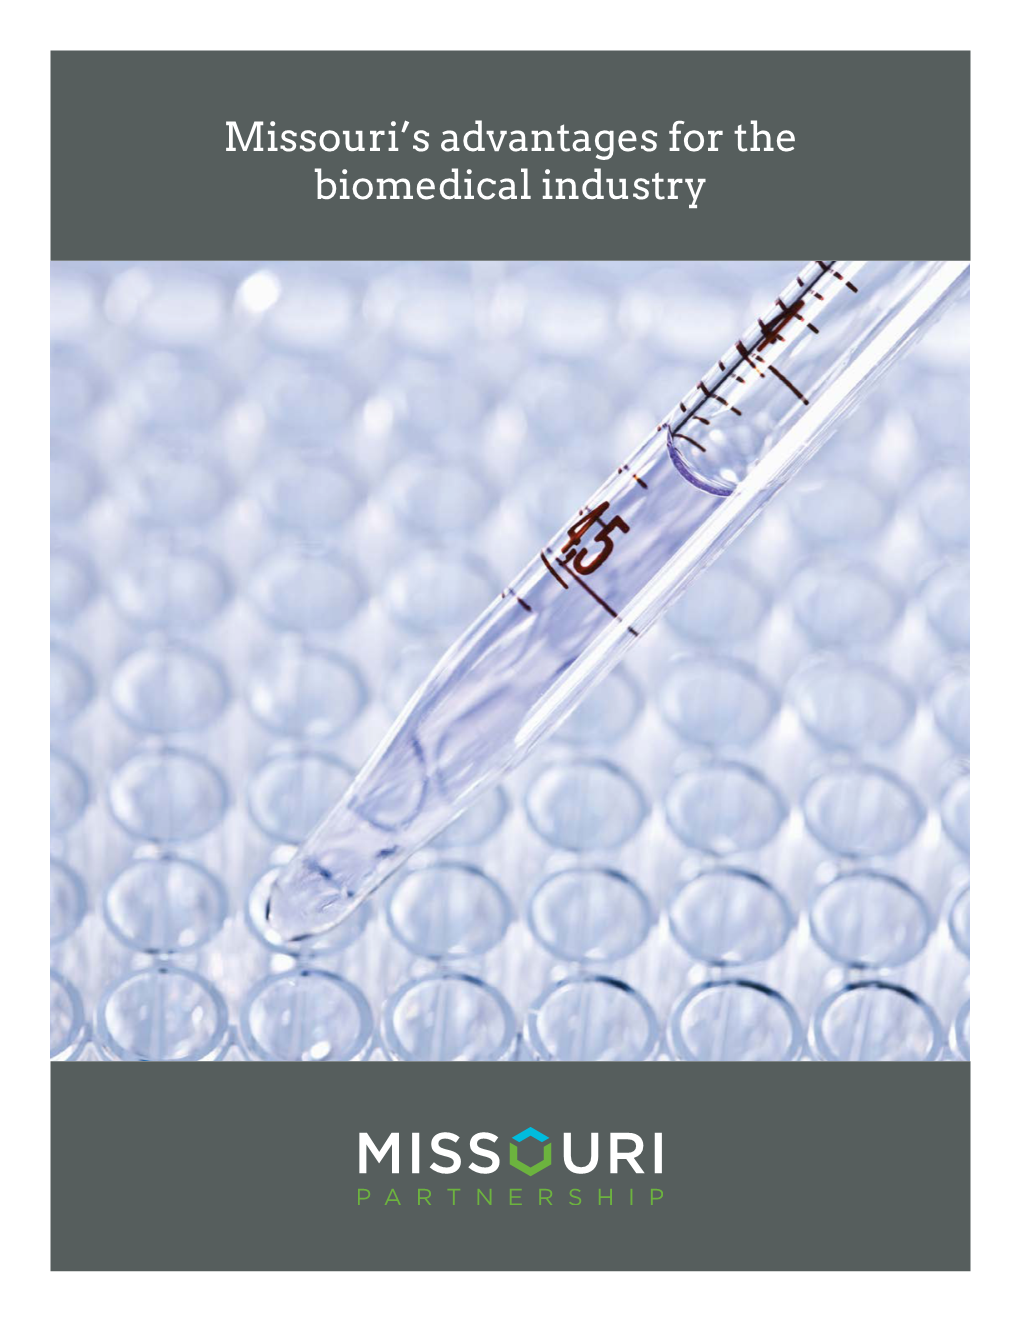 Missouri's Advantages for the Biomedical Industry